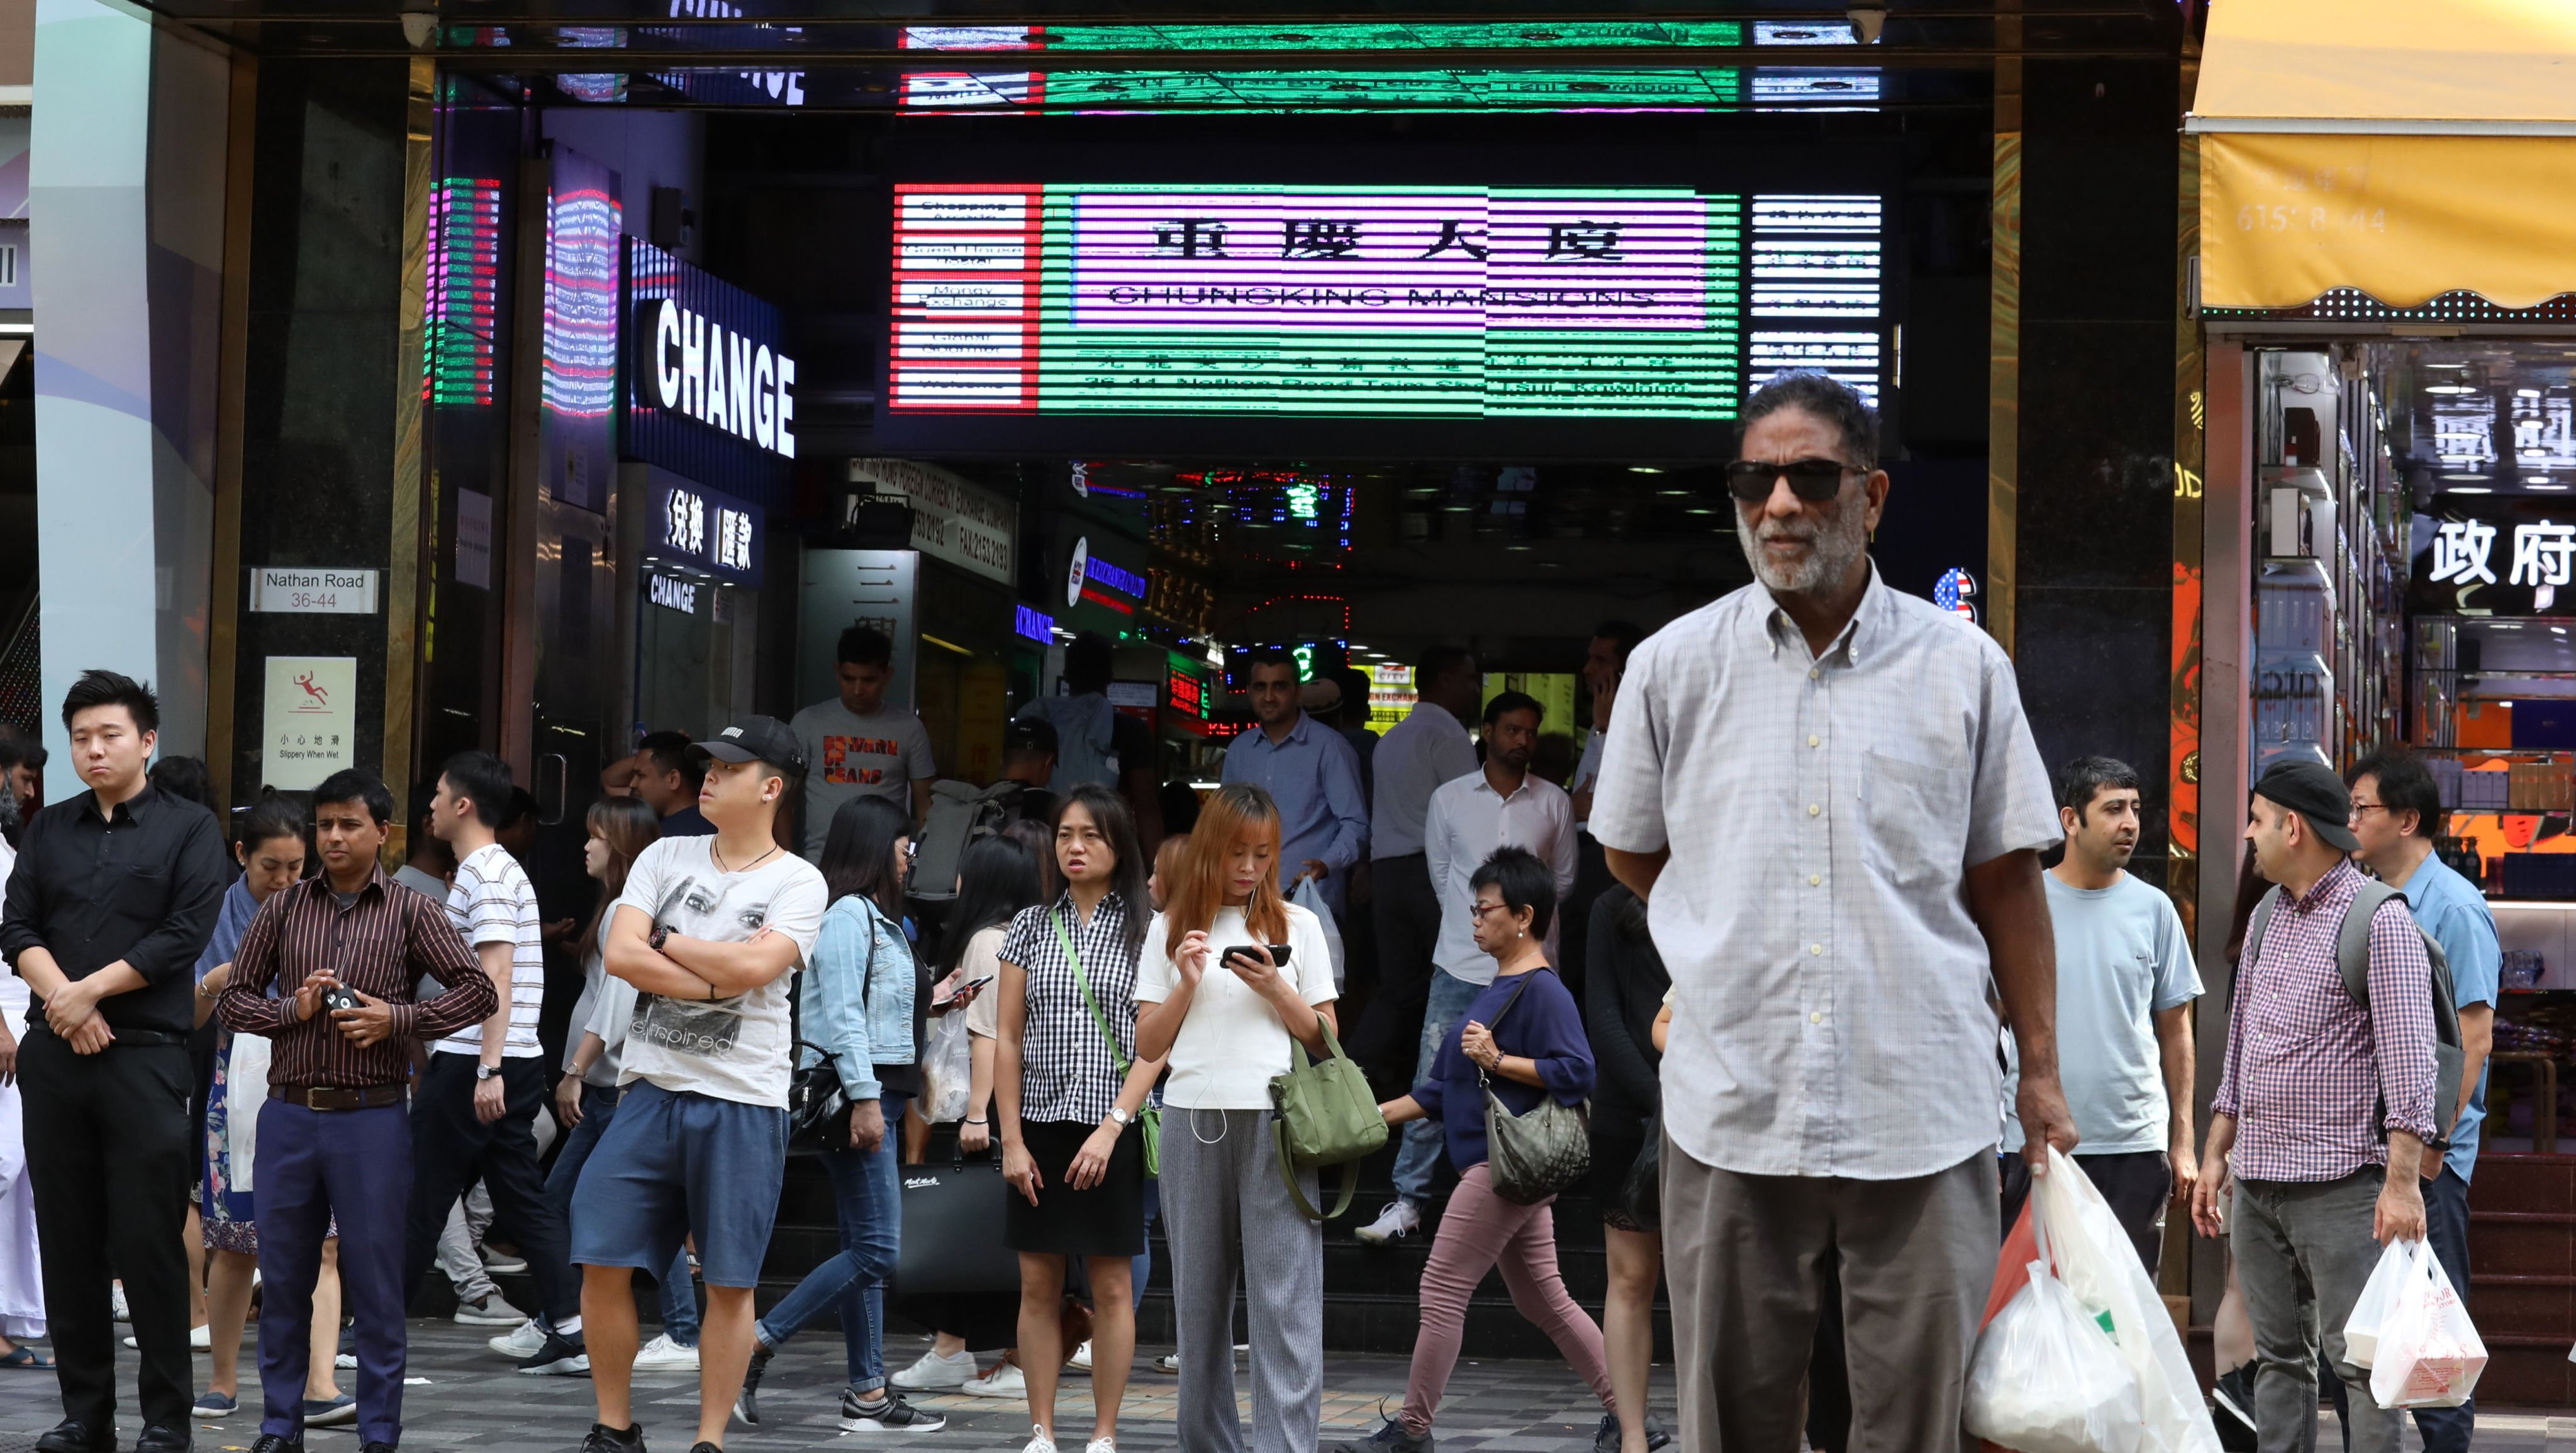 Hong Kong’s ethnic minority communities are facing an increasingly ageing population. Photo: Nora Tam